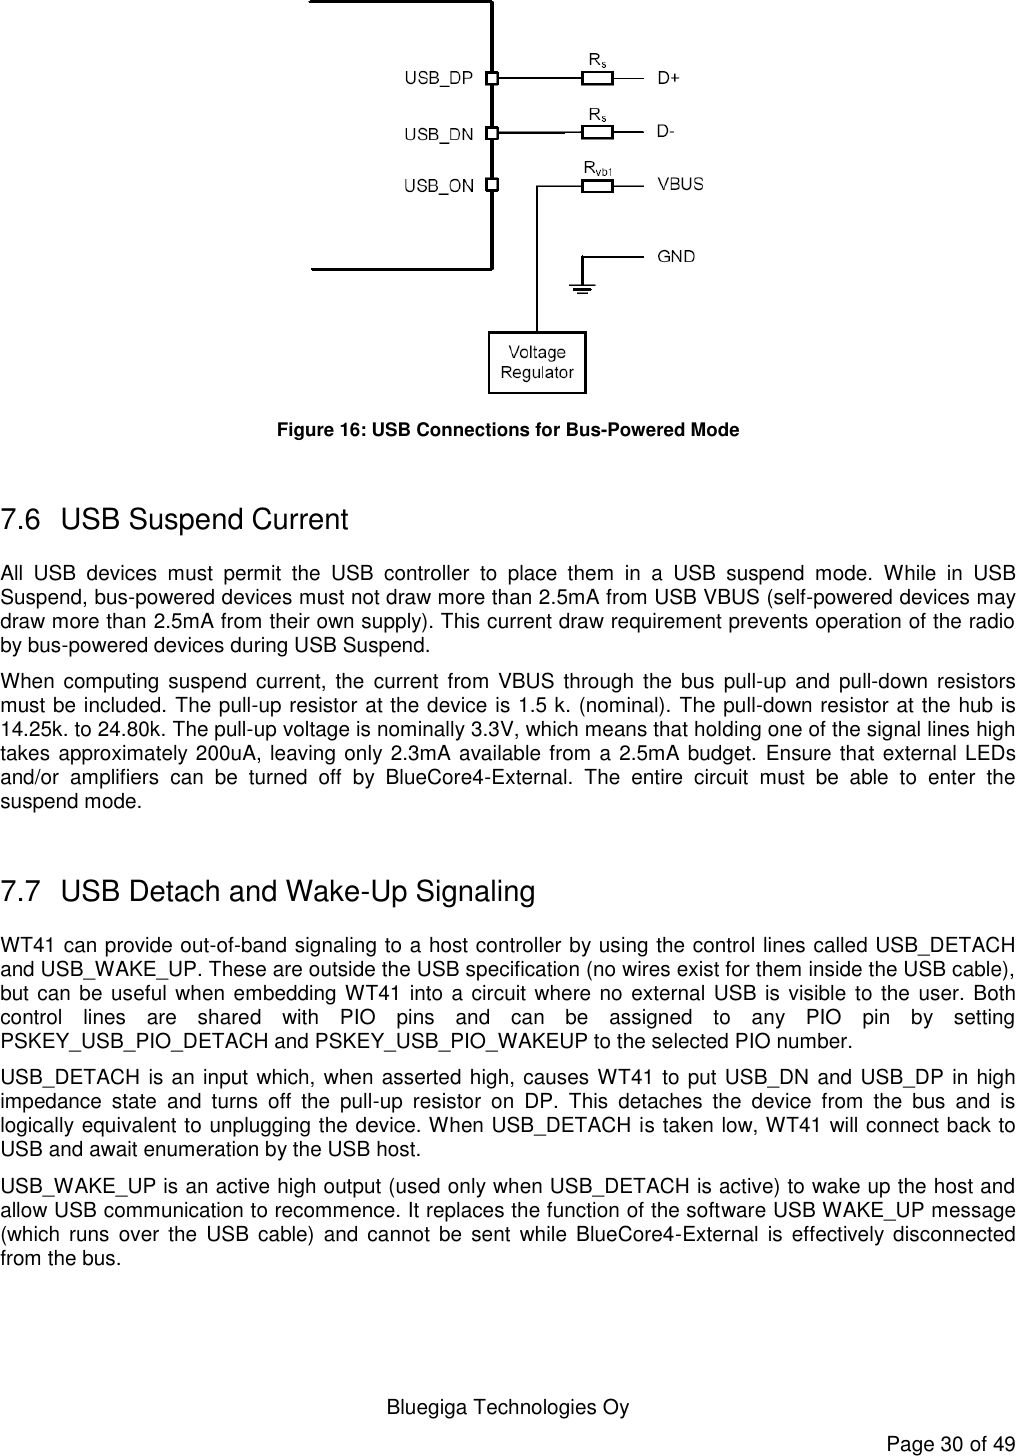   Bluegiga Technologies Oy Page 30 of 49  Figure 16: USB Connections for Bus-Powered Mode  7.6  USB Suspend Current All  USB  devices  must  permit  the  USB  controller  to  place  them  in  a  USB  suspend  mode.  While  in  USB Suspend, bus-powered devices must not draw more than 2.5mA from USB VBUS (self-powered devices may draw more than 2.5mA from their own supply). This current draw requirement prevents operation of the radio by bus-powered devices during USB Suspend. When computing  suspend  current, the  current  from  VBUS  through the  bus  pull-up  and pull-down resistors must be included. The pull-up resistor at the device is 1.5 k. (nominal). The pull-down resistor at the hub is 14.25k. to 24.80k. The pull-up voltage is nominally 3.3V, which means that holding one of the signal lines high takes approximately 200uA, leaving only 2.3mA available from a 2.5mA budget. Ensure that external LEDs and/or  amplifiers  can  be  turned  off  by  BlueCore4-External.  The  entire  circuit  must  be  able  to  enter  the suspend mode.  7.7  USB Detach and Wake-Up Signaling WT41 can provide out-of-band signaling to a host controller by using the control lines called USB_DETACH and USB_WAKE_UP. These are outside the USB specification (no wires exist for them inside the USB cable), but can be useful when embedding WT41 into a circuit where no external USB is visible to the user. Both control  lines  are  shared  with  PIO  pins  and  can  be  assigned  to  any  PIO  pin  by  setting PSKEY_USB_PIO_DETACH and PSKEY_USB_PIO_WAKEUP to the selected PIO number. USB_DETACH is an input which, when asserted high, causes WT41 to put USB_DN and USB_DP in high impedance  state  and  turns  off  the  pull-up  resistor  on  DP.  This  detaches  the  device  from  the  bus  and  is logically equivalent to unplugging the device. When USB_DETACH is taken low, WT41 will connect back to USB and await enumeration by the USB host. USB_WAKE_UP is an active high output (used only when USB_DETACH is active) to wake up the host and allow USB communication to recommence. It replaces the function of the software USB WAKE_UP message (which runs  over  the  USB  cable)  and  cannot  be  sent  while BlueCore4-External  is  effectively disconnected from the bus. 